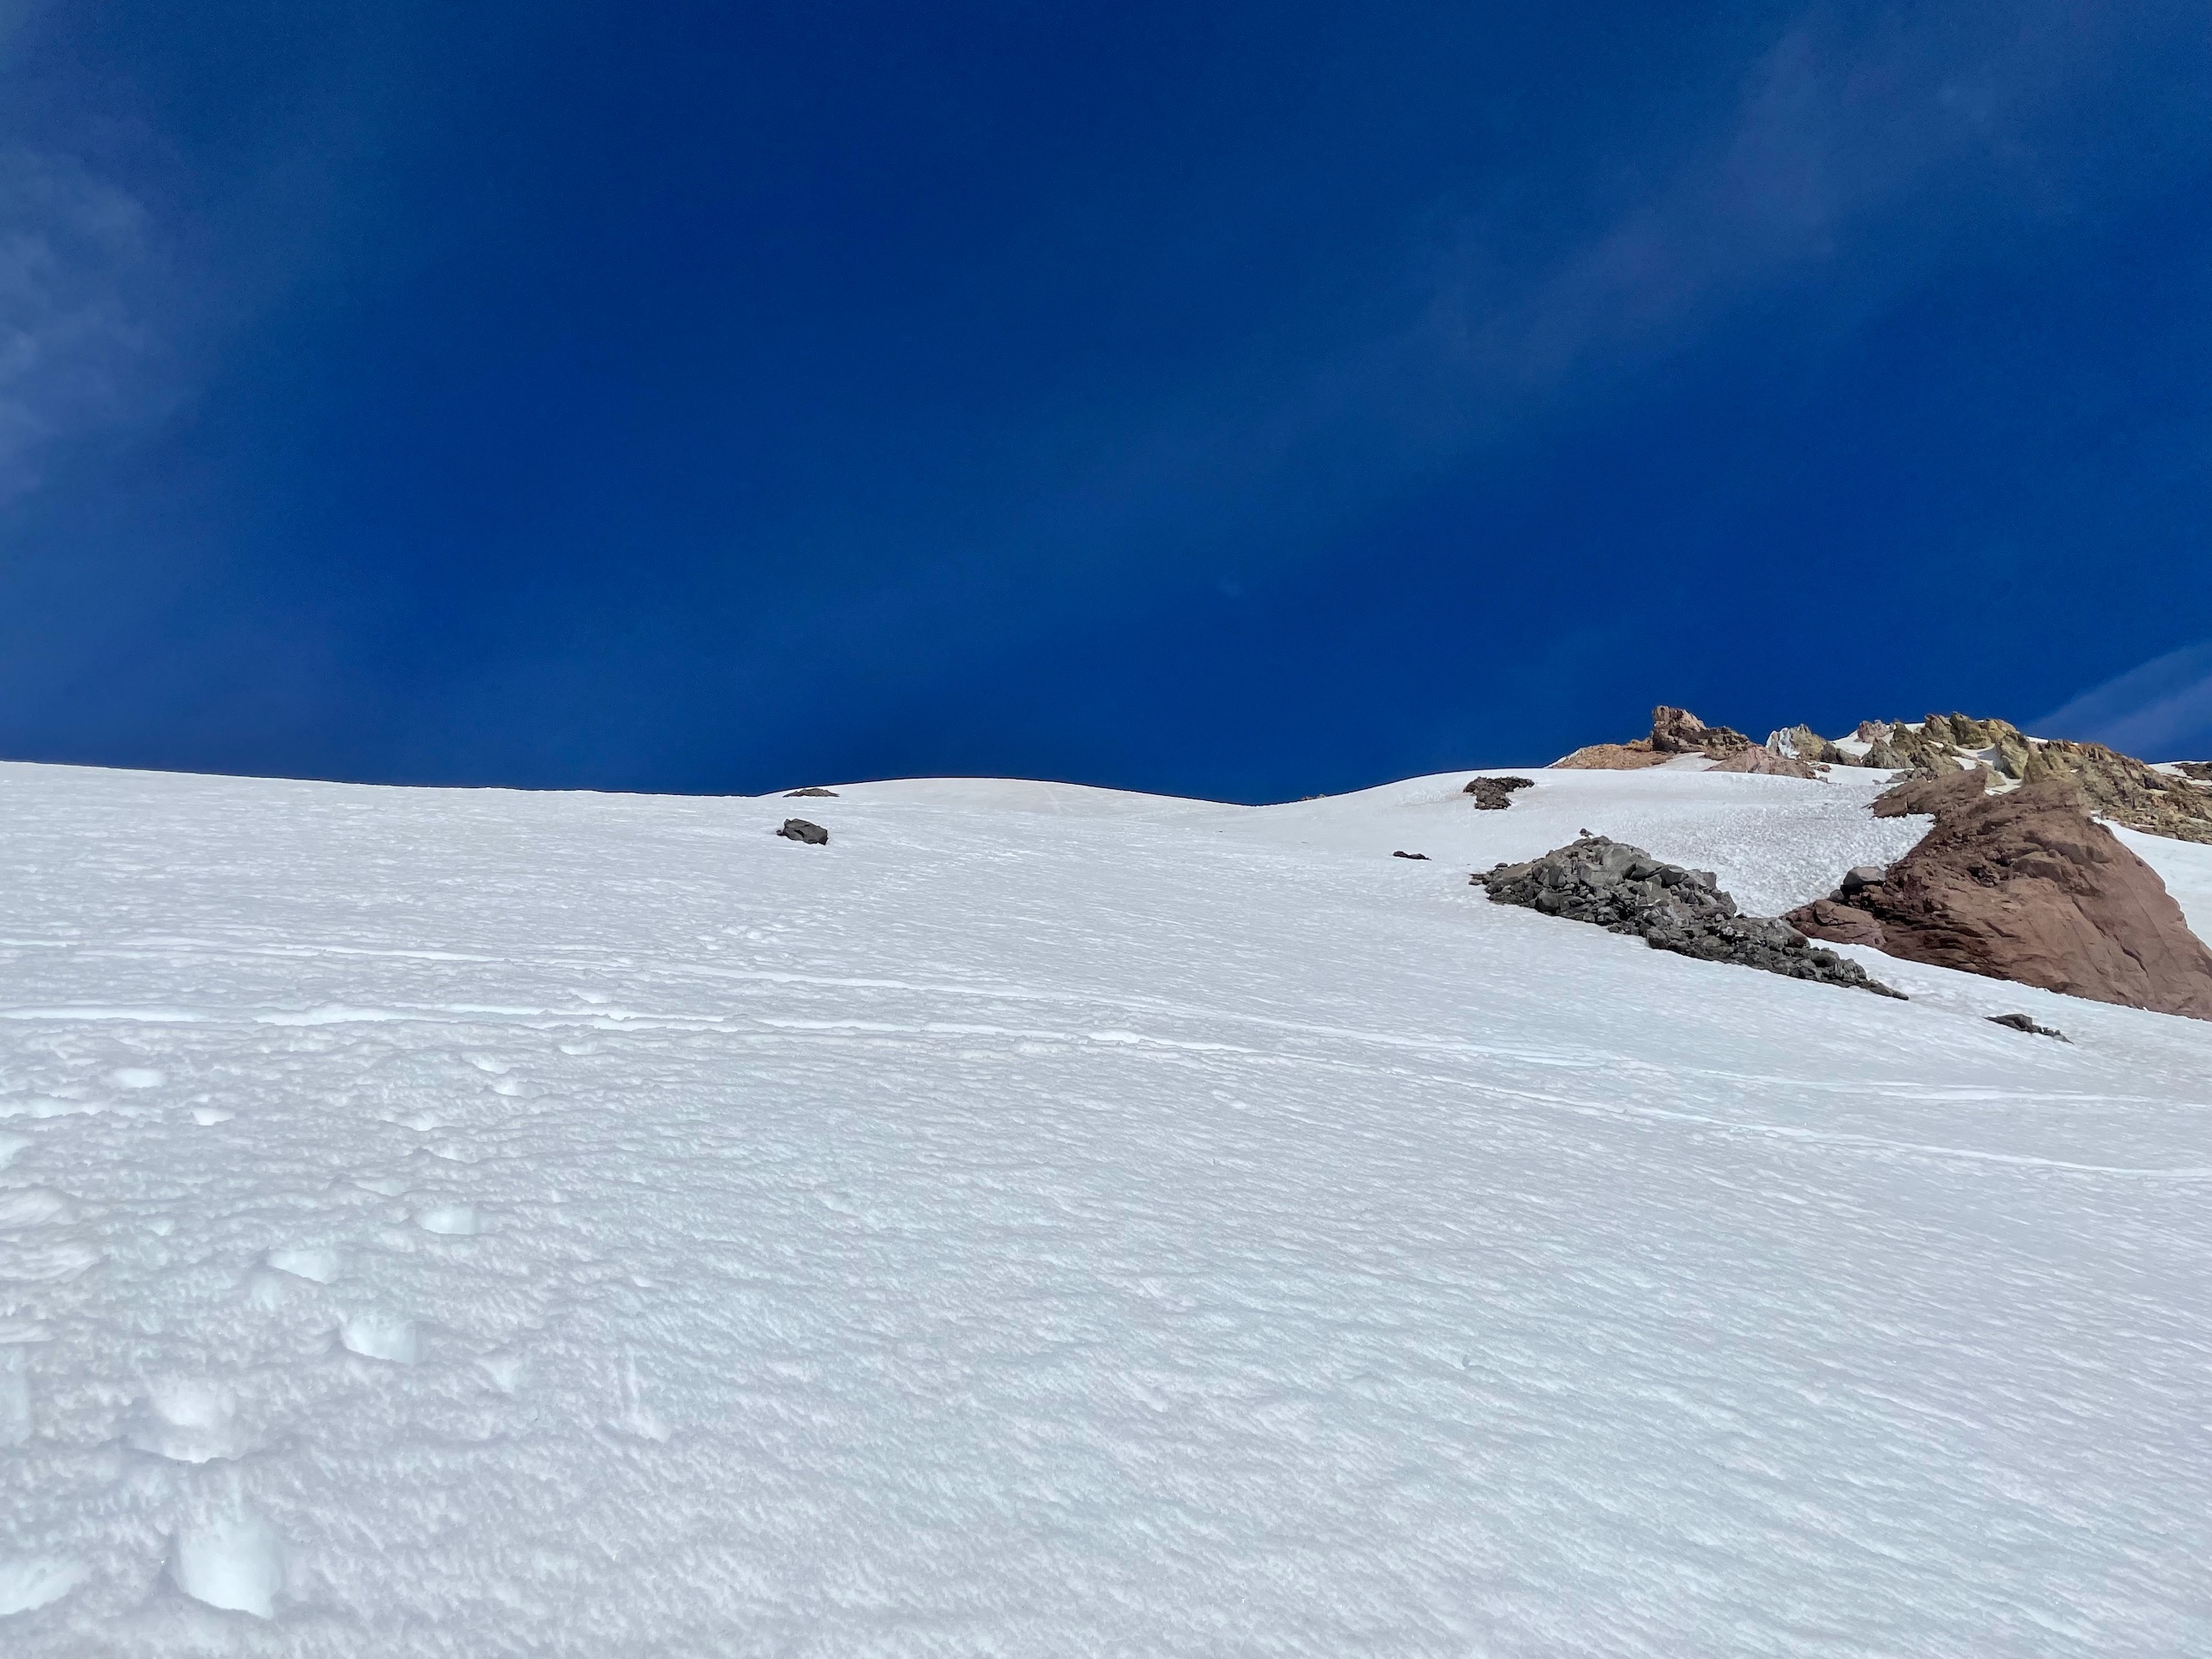 Small foot holds punched into a steep snow face, receding uphill towards the summit.